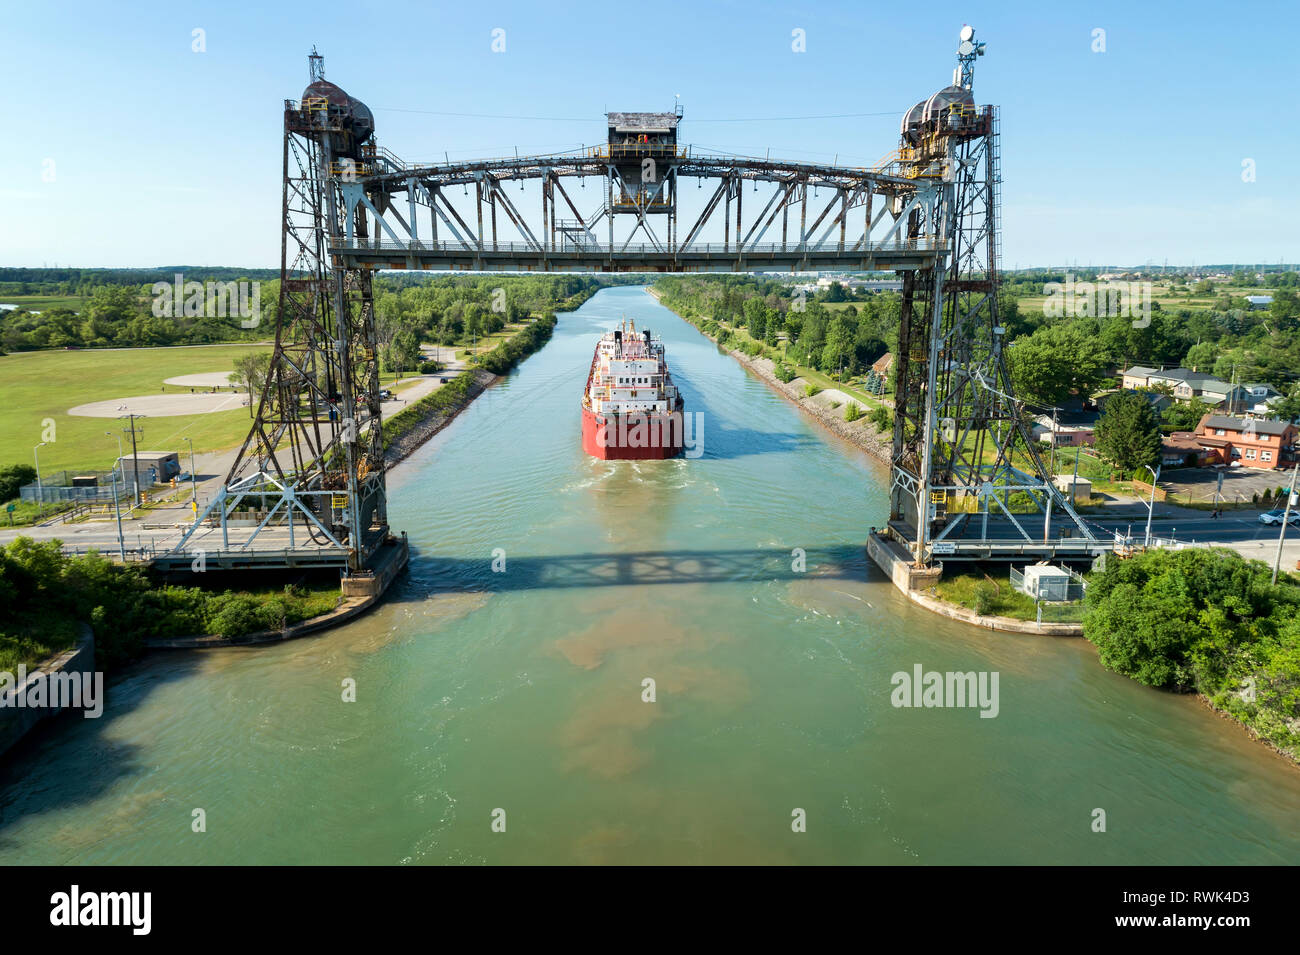 Aerial view of large laker ship navigating under a metal lift bridge in a canal with blue sky; Thorold, Ontario, Canada Stock Photo